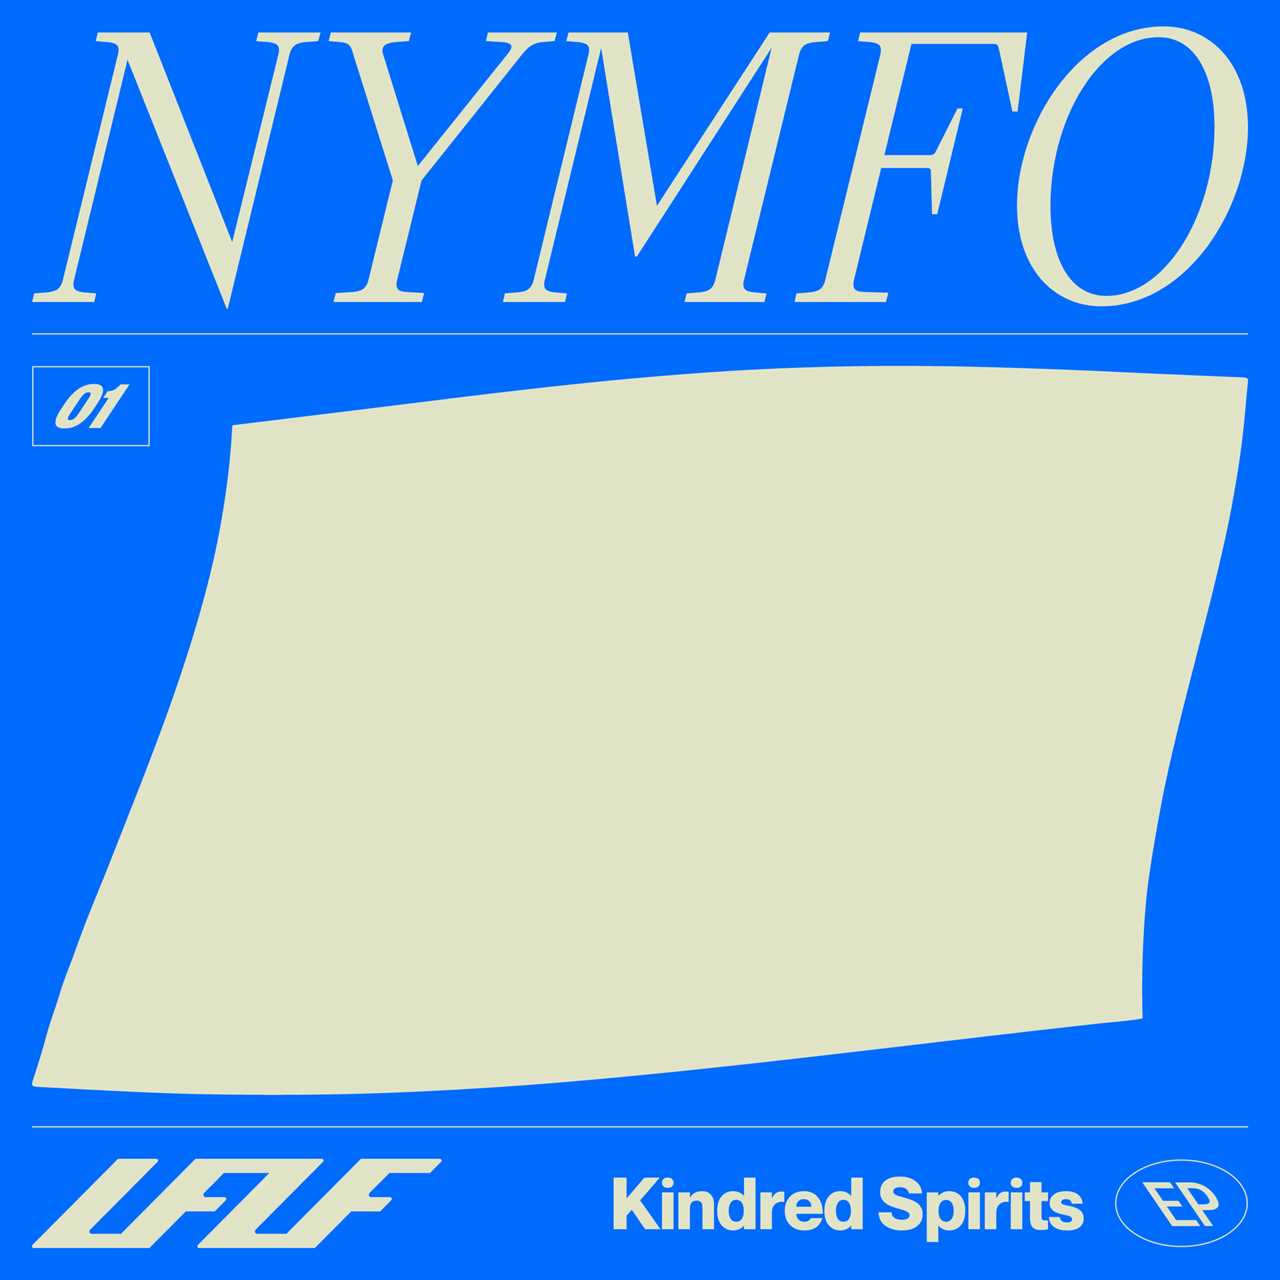 Nymfo Launches Love For Low Frequencies